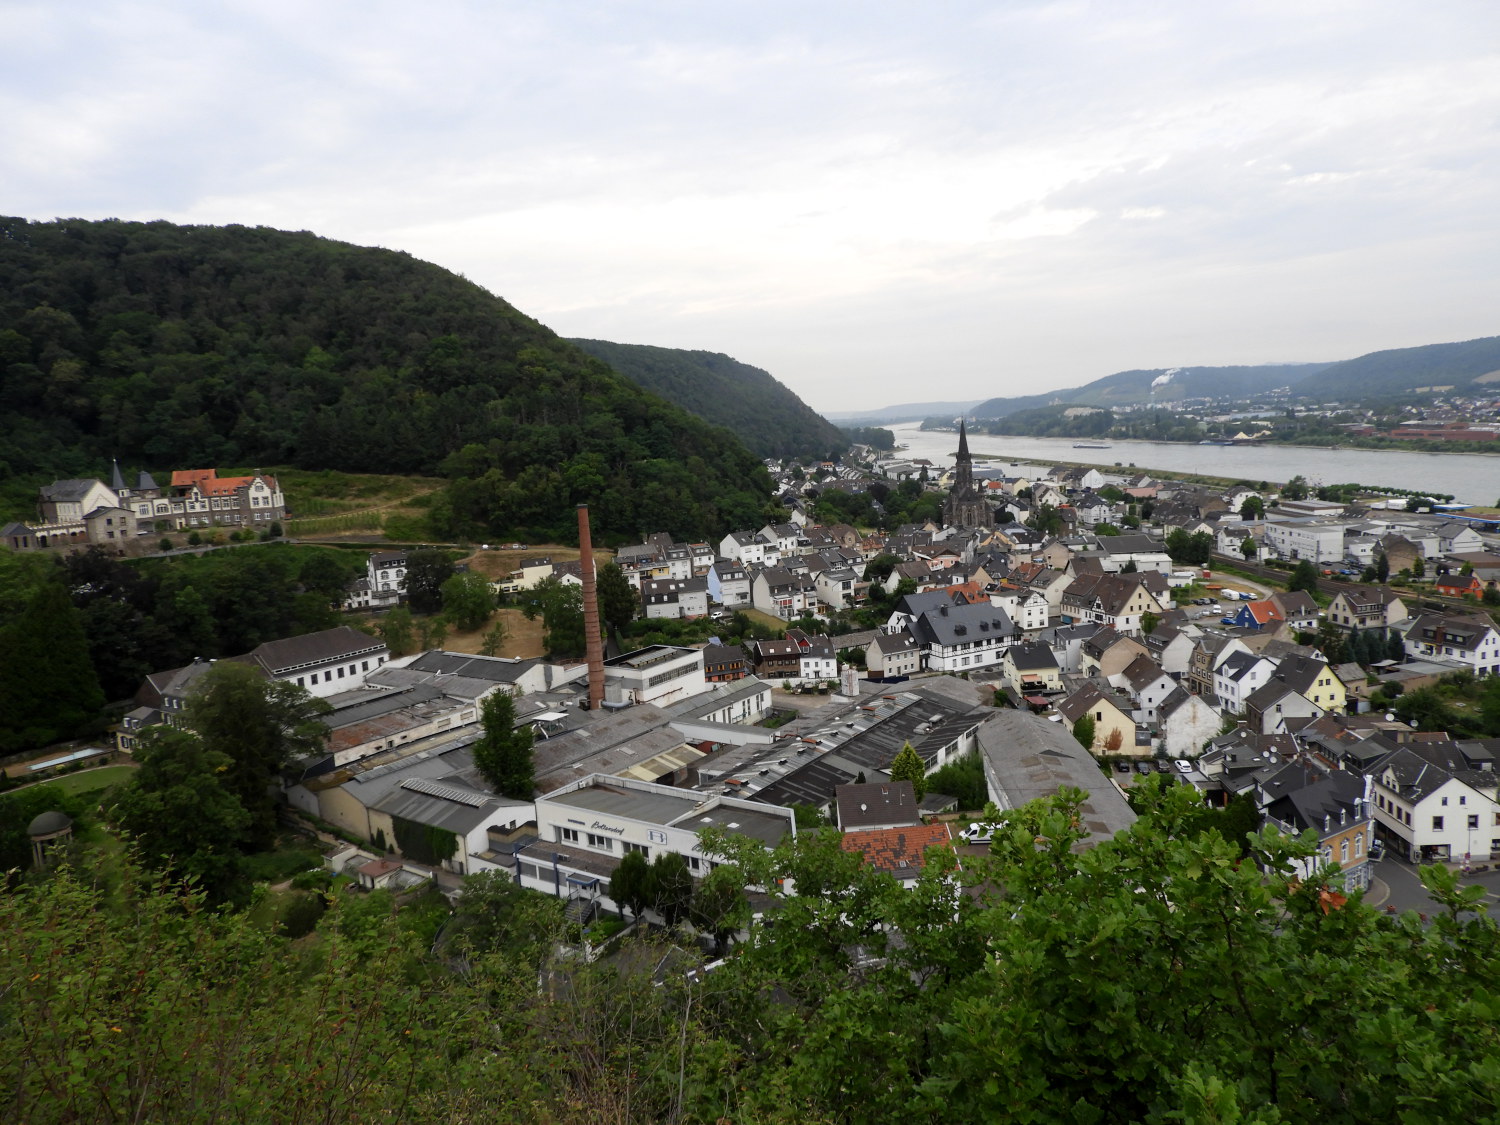 Looking down on Brohl-Lutzing